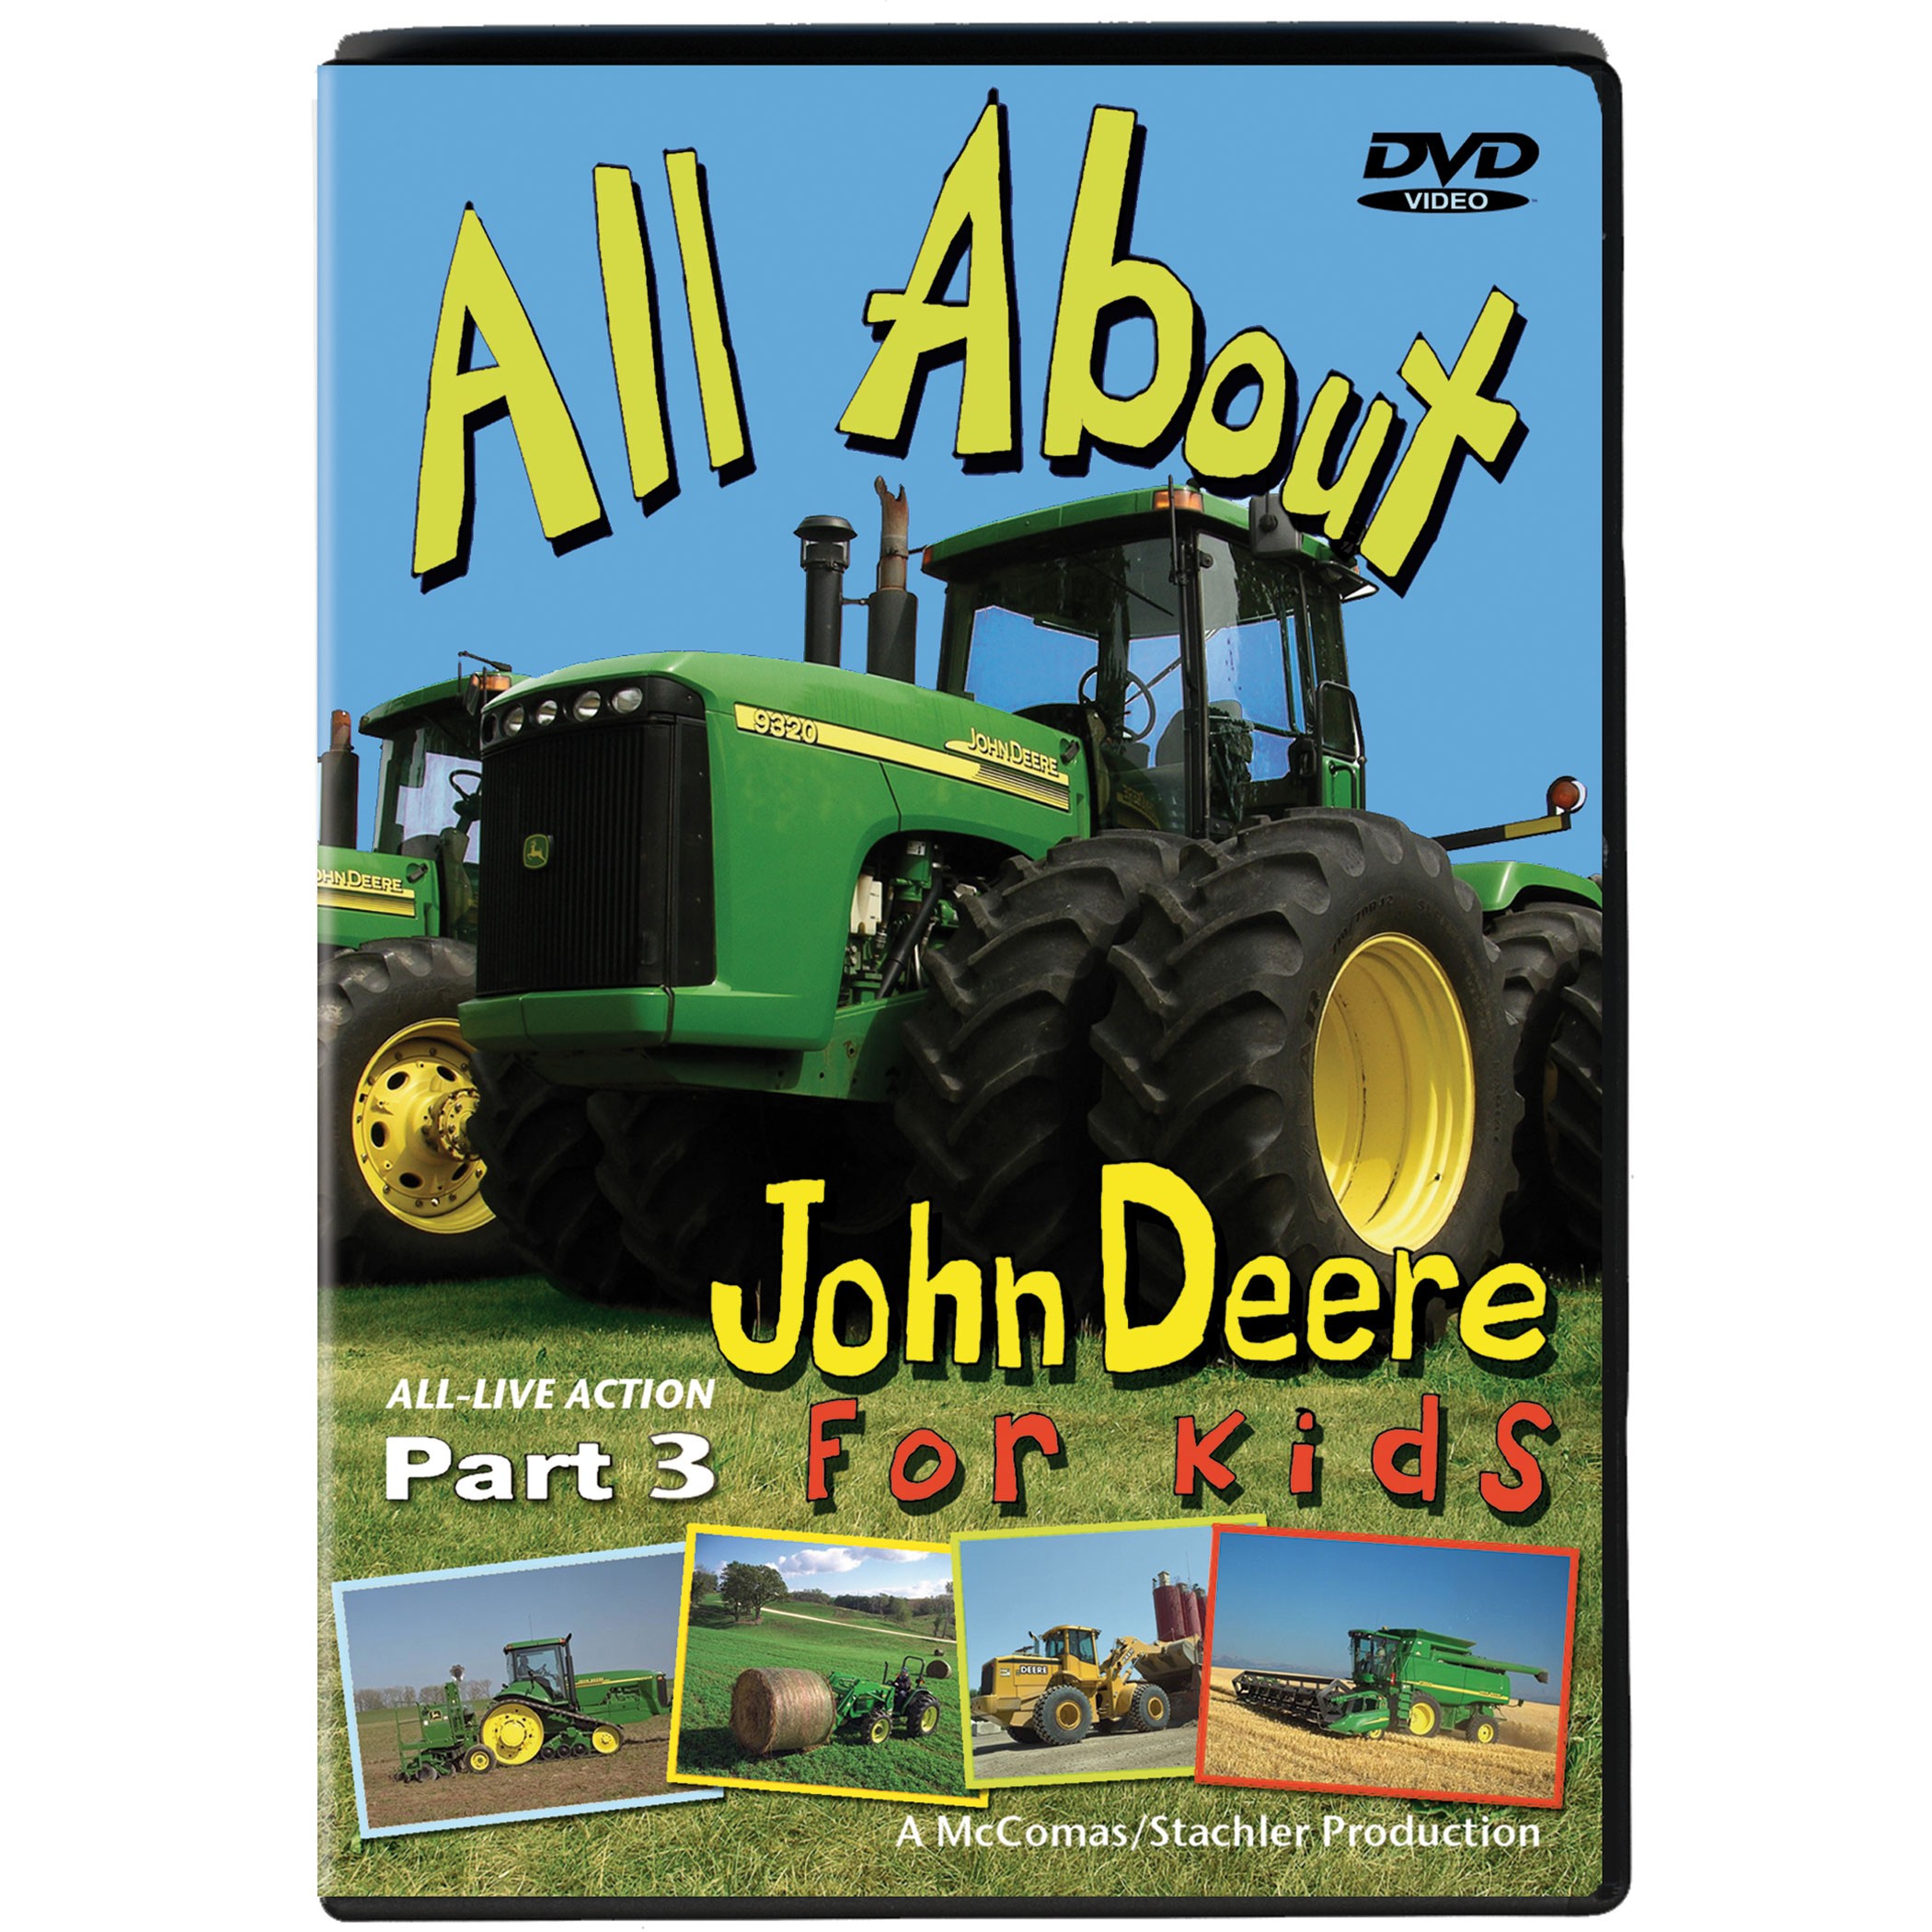 John Deere action and fun continues on All About John Deere DVD Part 3 ...